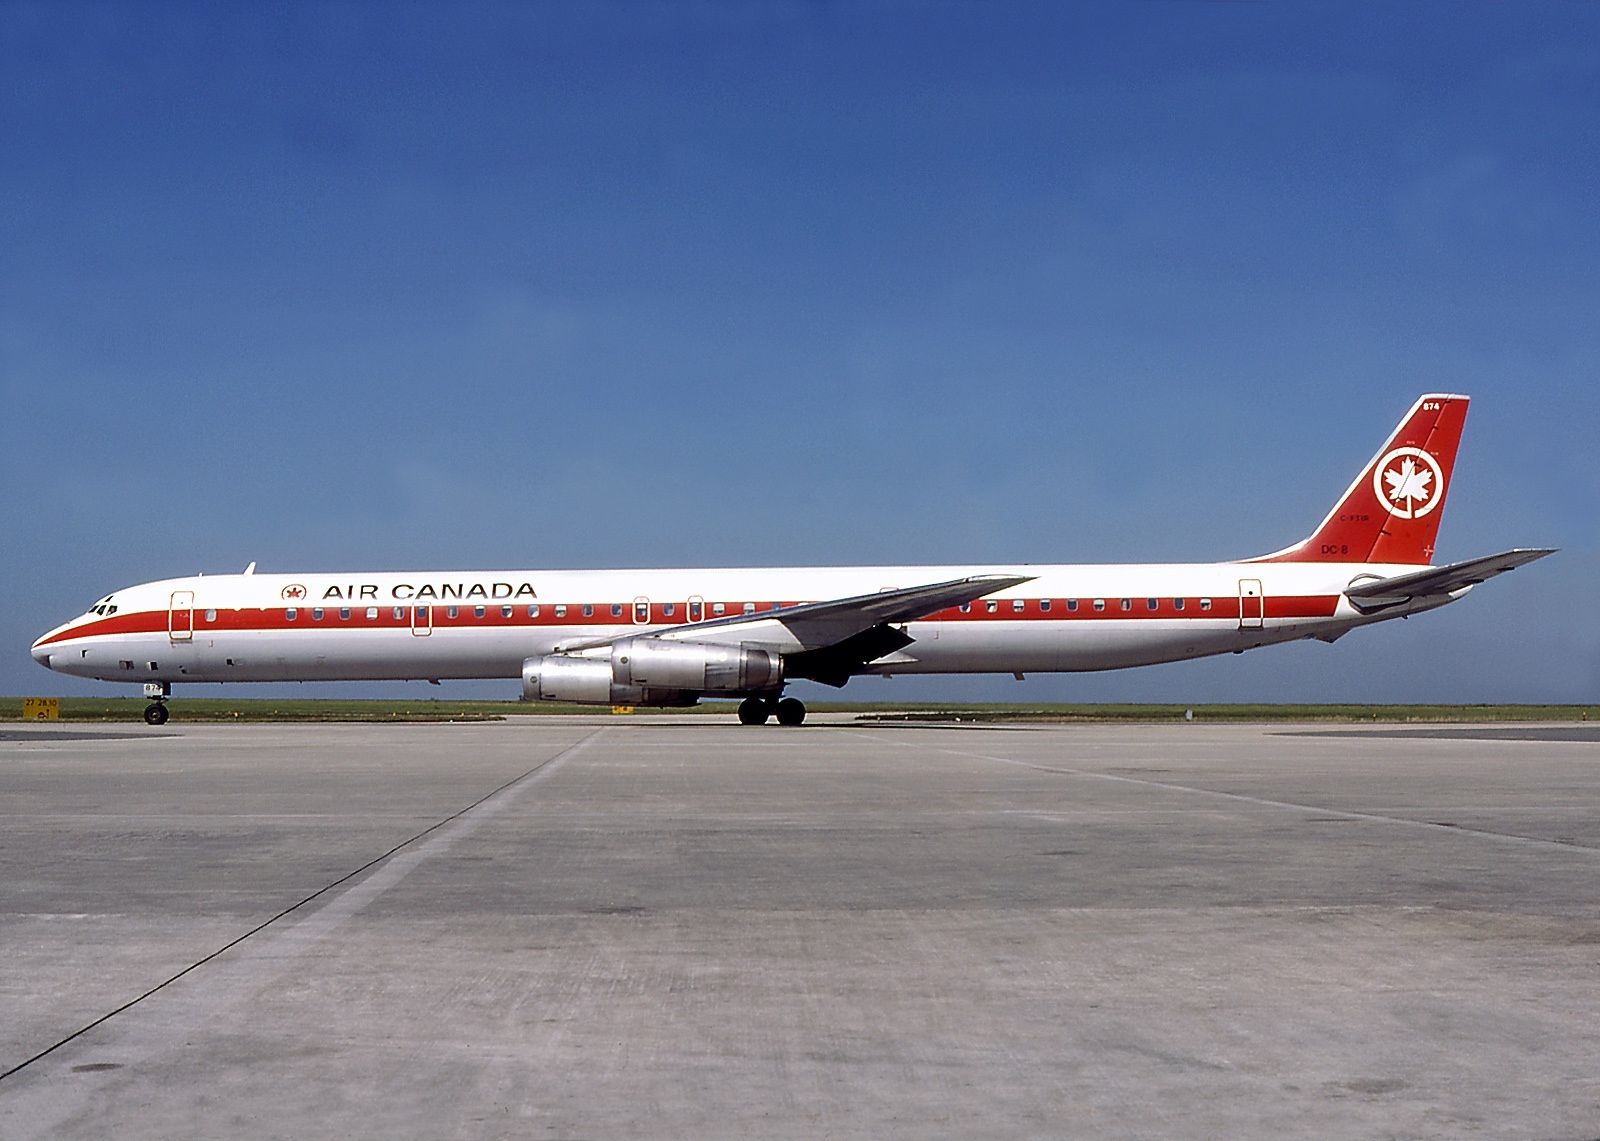 White passenger jetliner with red stripe down the side and Air Canada livery